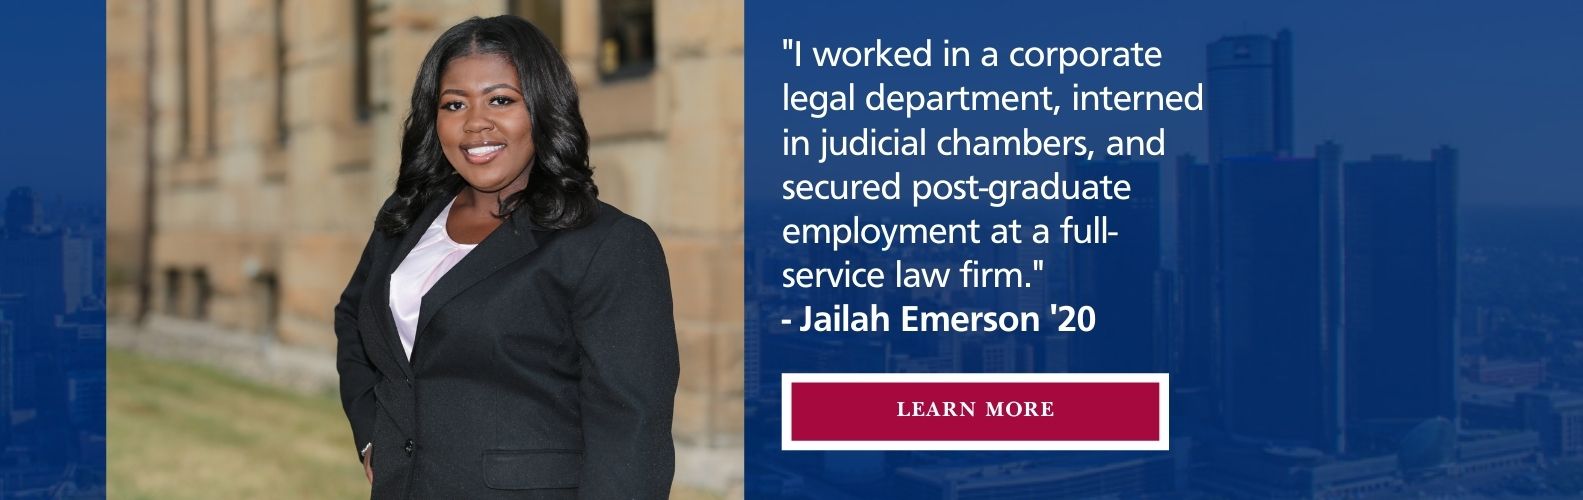 Student standing in front of school. I worked in a corporate legal department, interned in judicial chambers, and secured post-graduate employment at a full-time service law firm. -Jailah Emerson '20